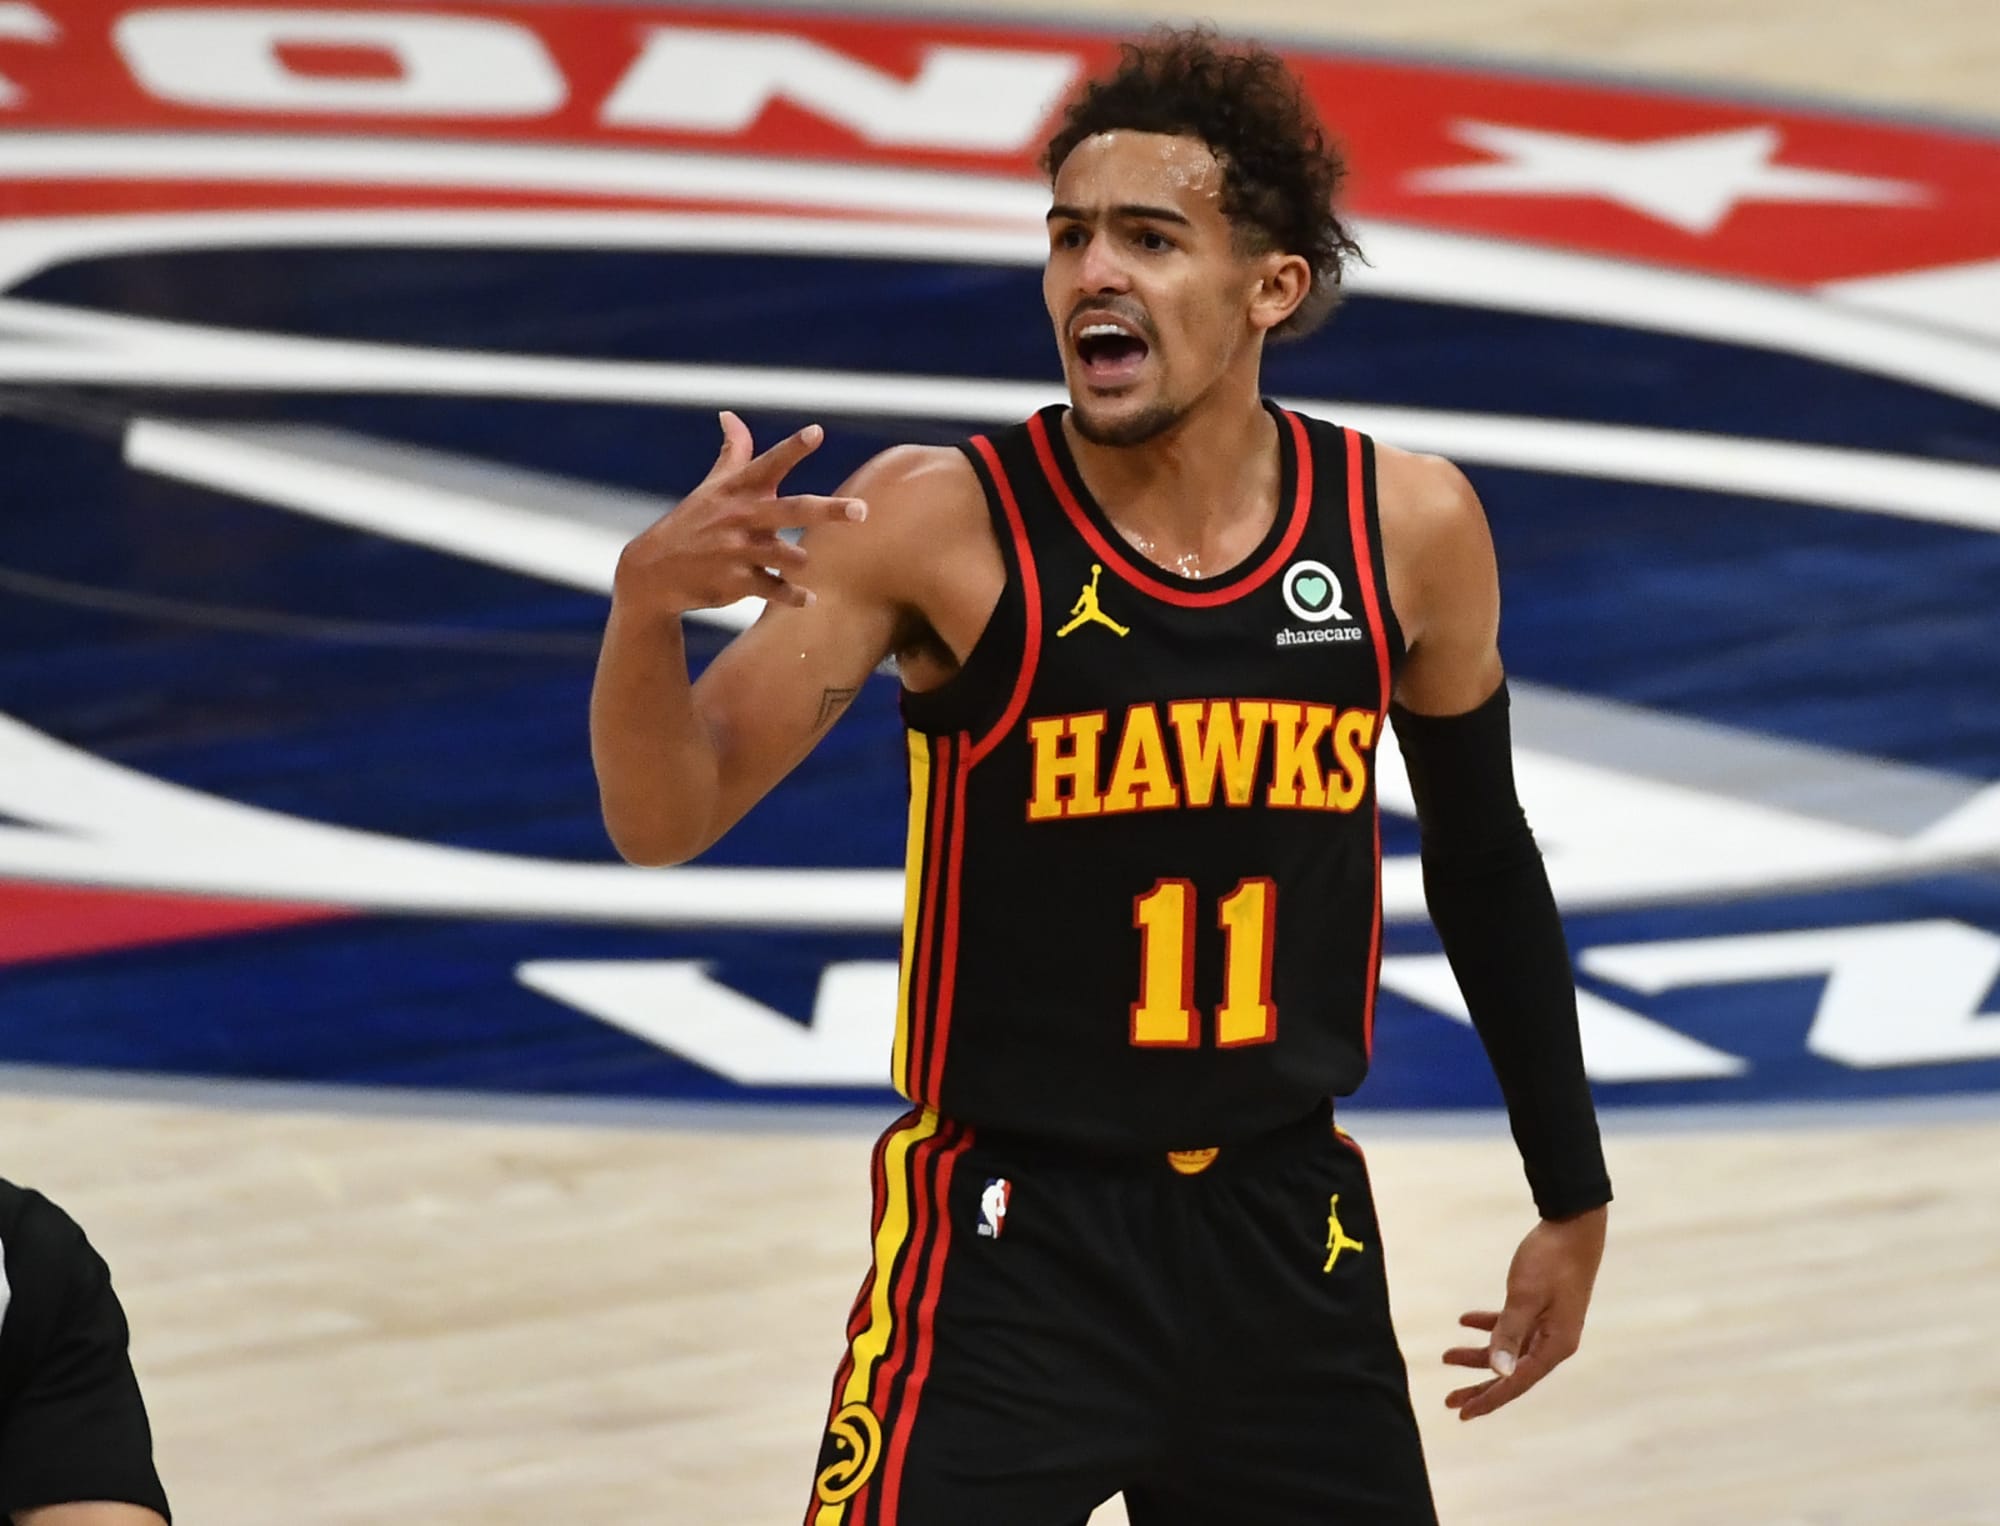 New Trae Young 2021 Wallpapers